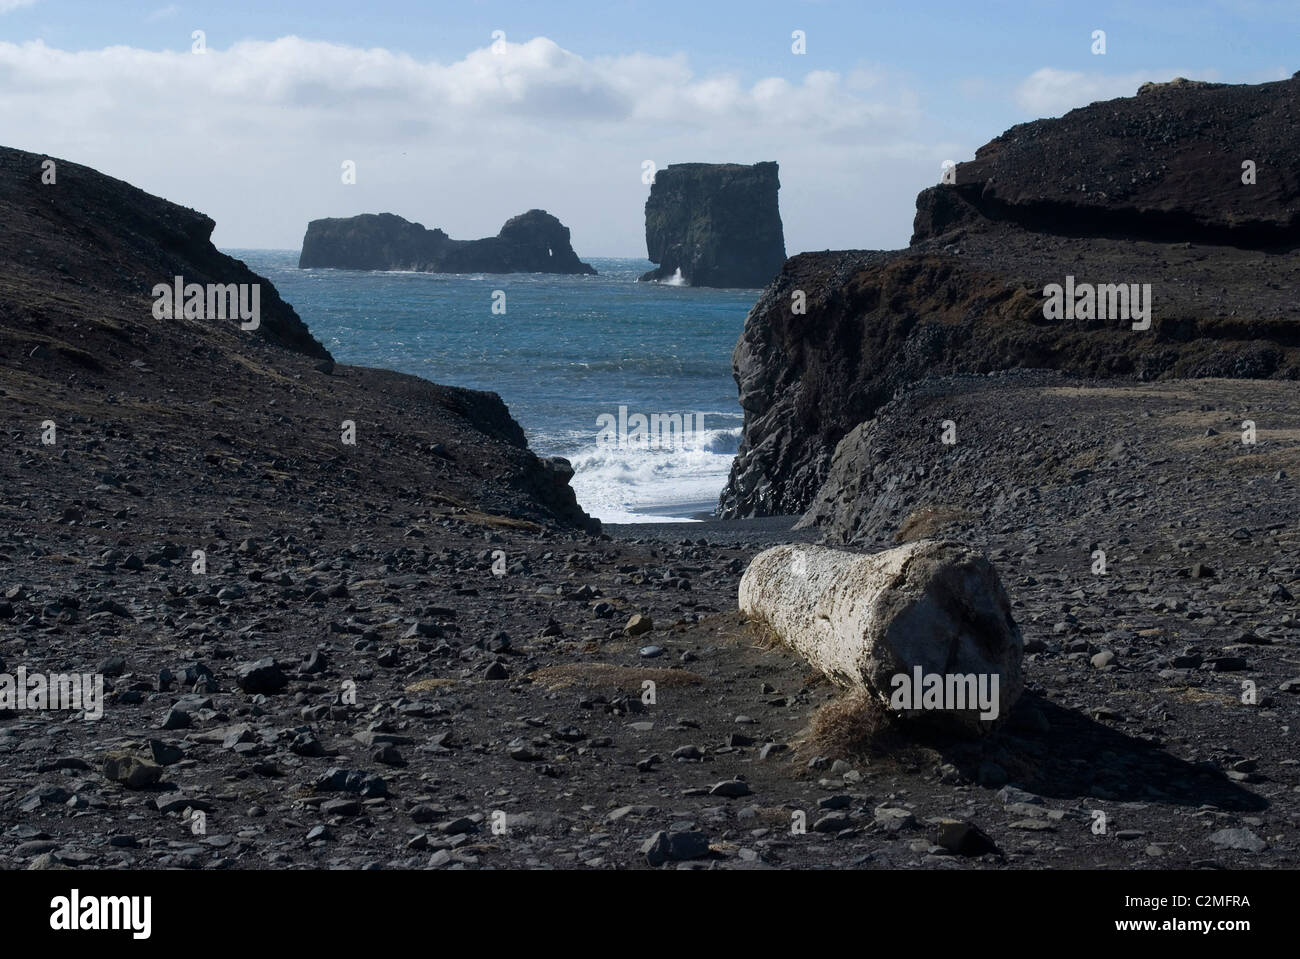 Dyrholaey cliff promontory and rock formations with black sand beach, near Vik, Southern Iceland Stock Photo